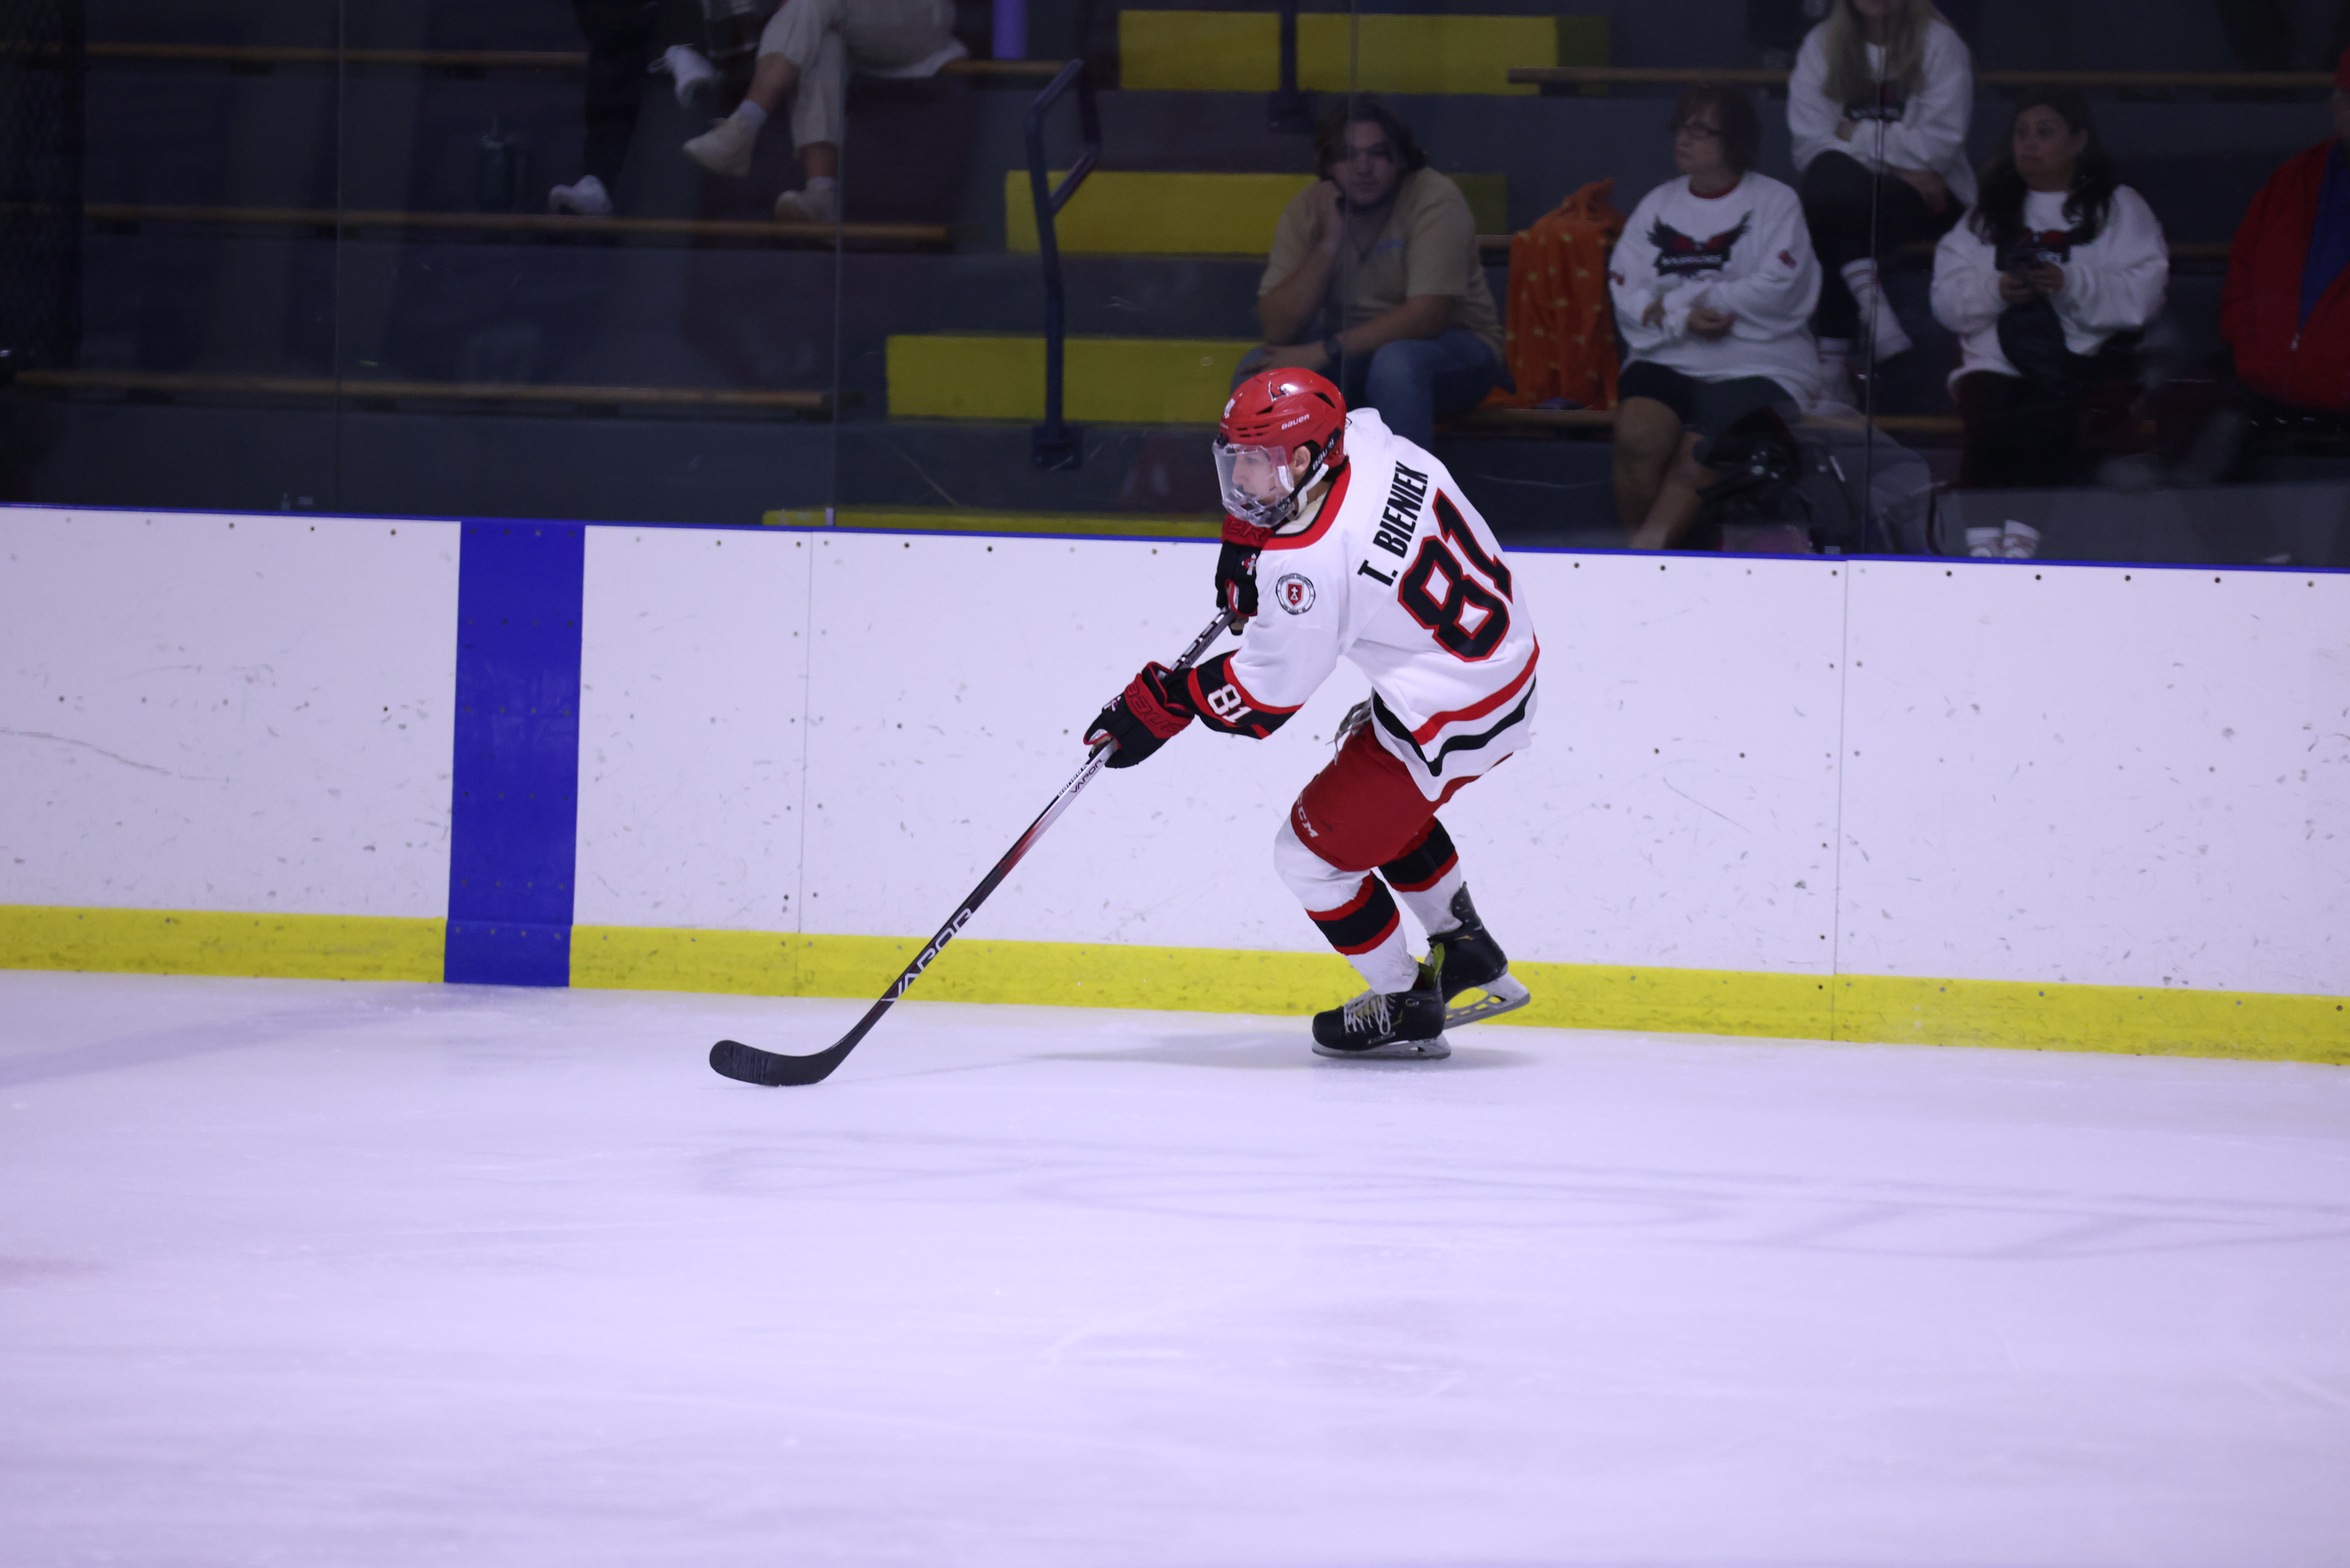 Men's Hockey sweeps Rochester with 4-1 win on Saturday